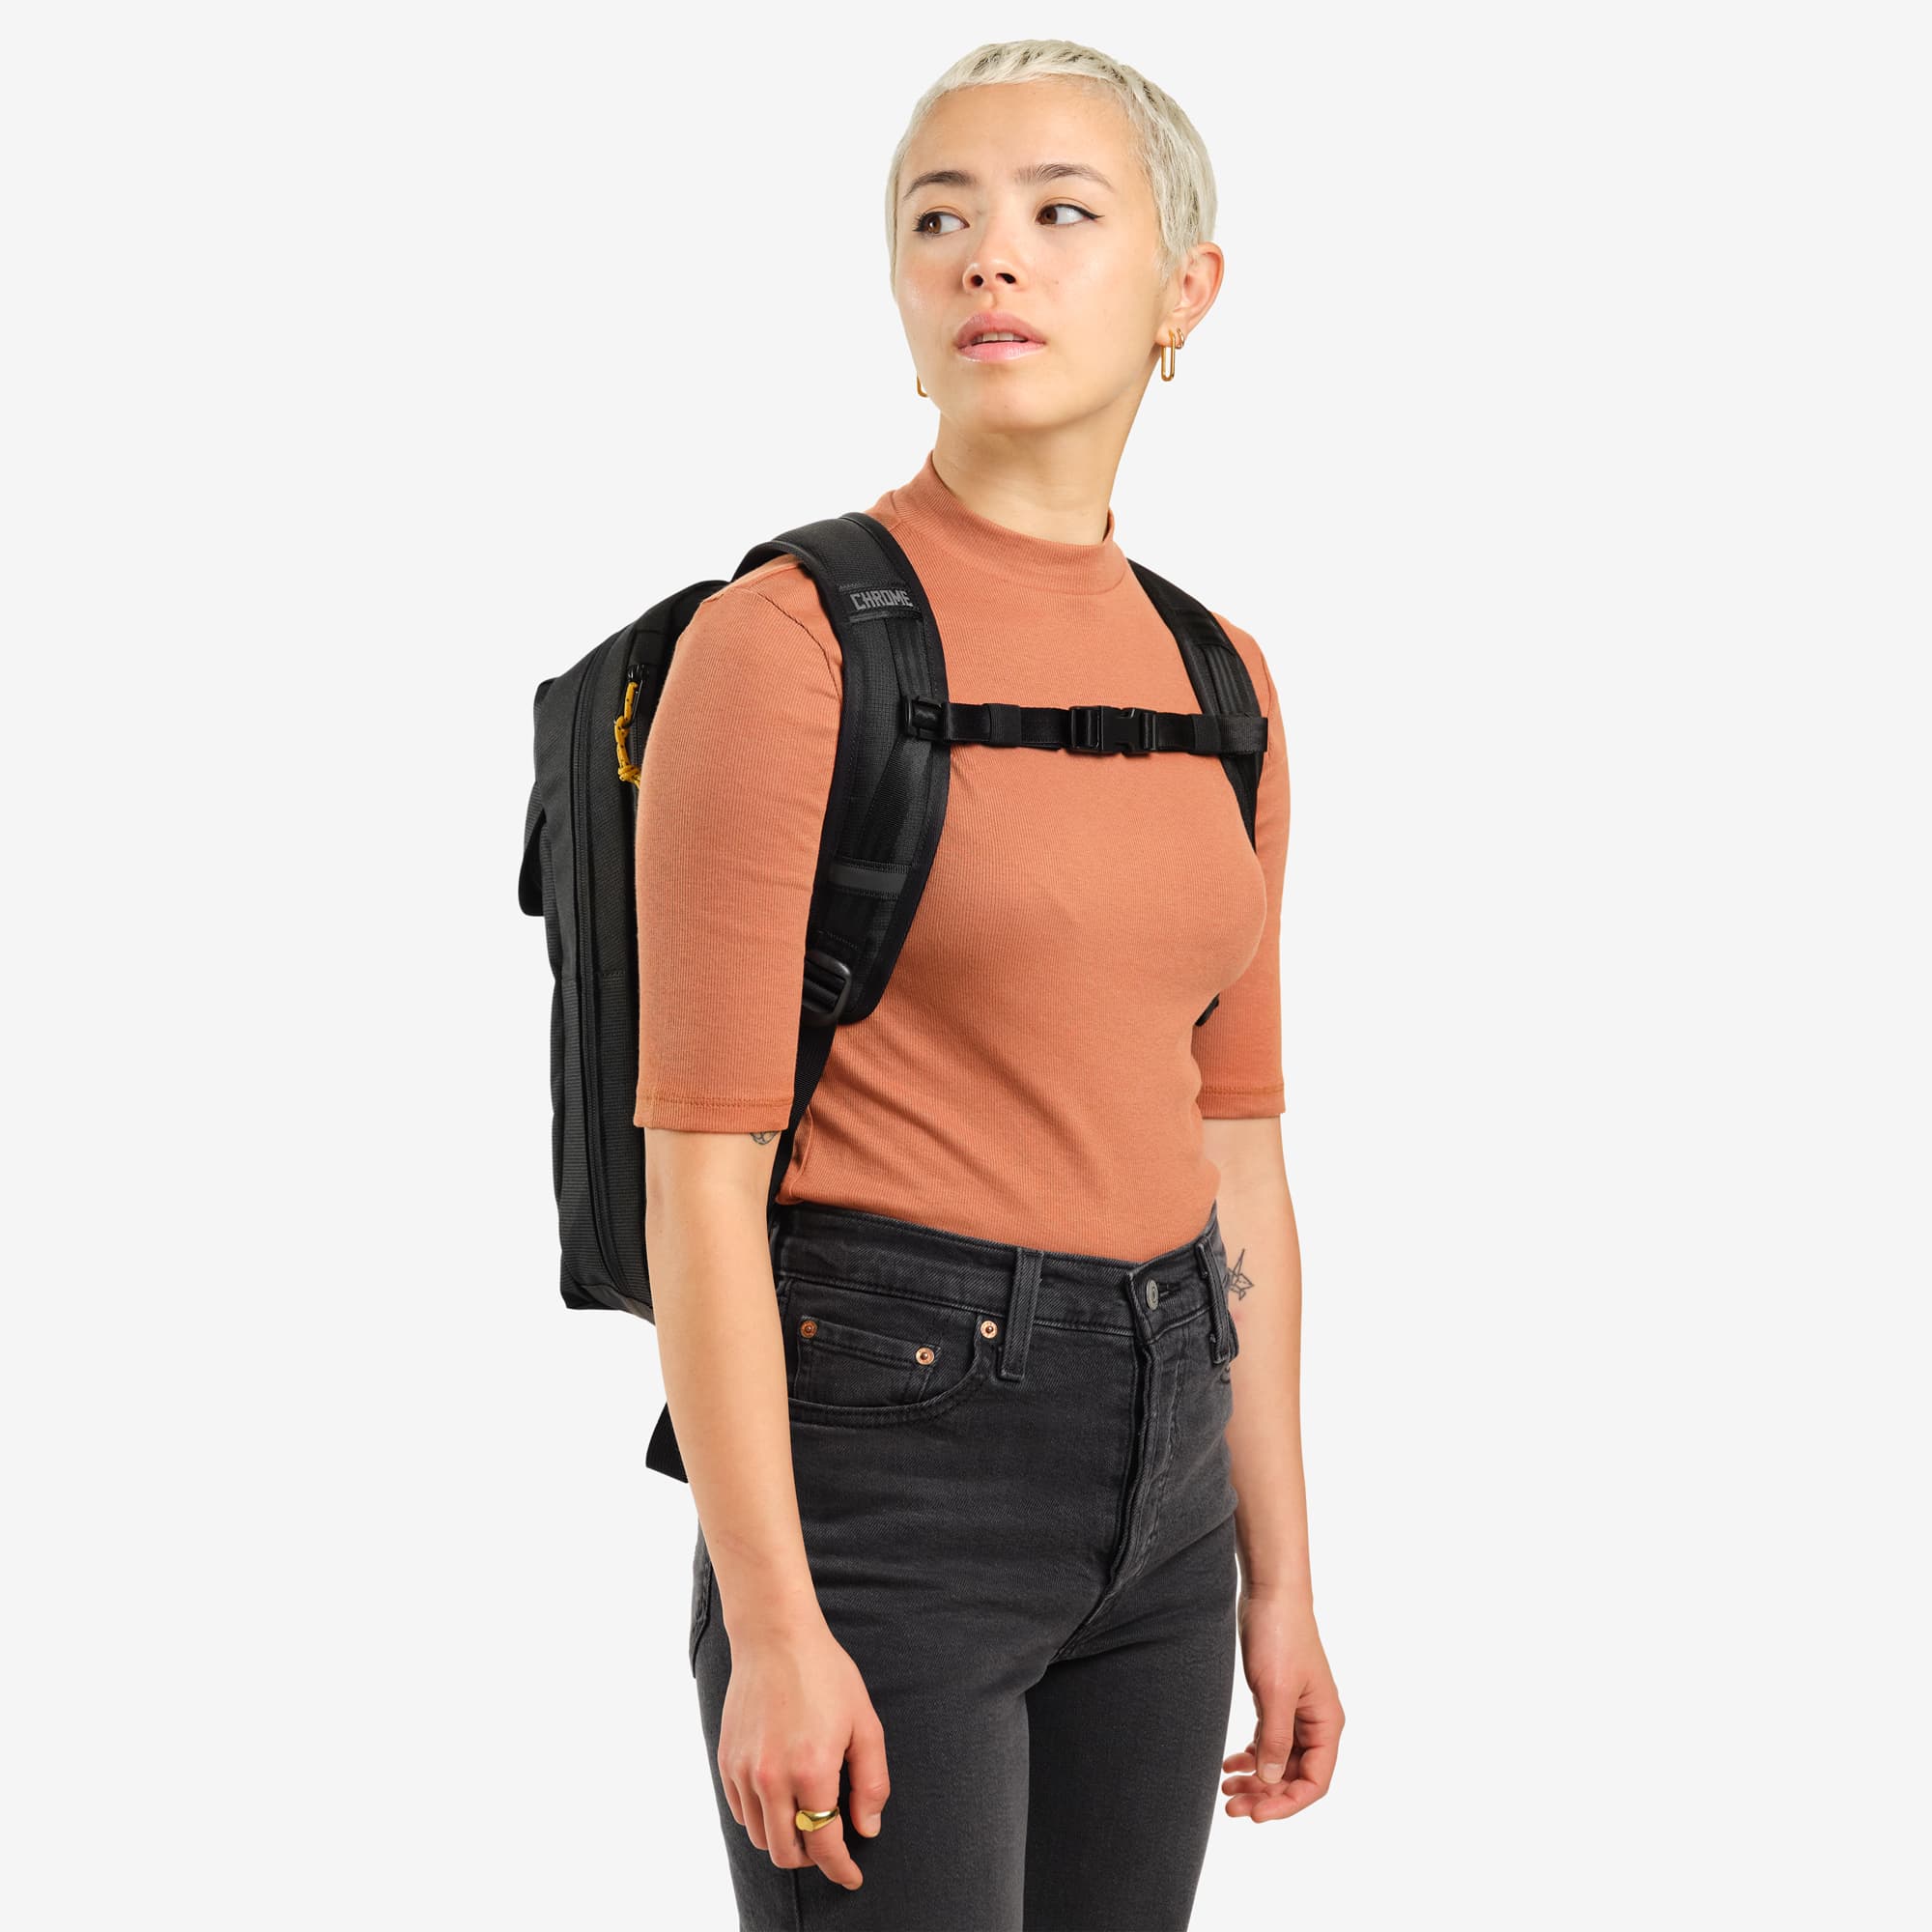 Ruckas 14L Backpack in black worn by a woman front view